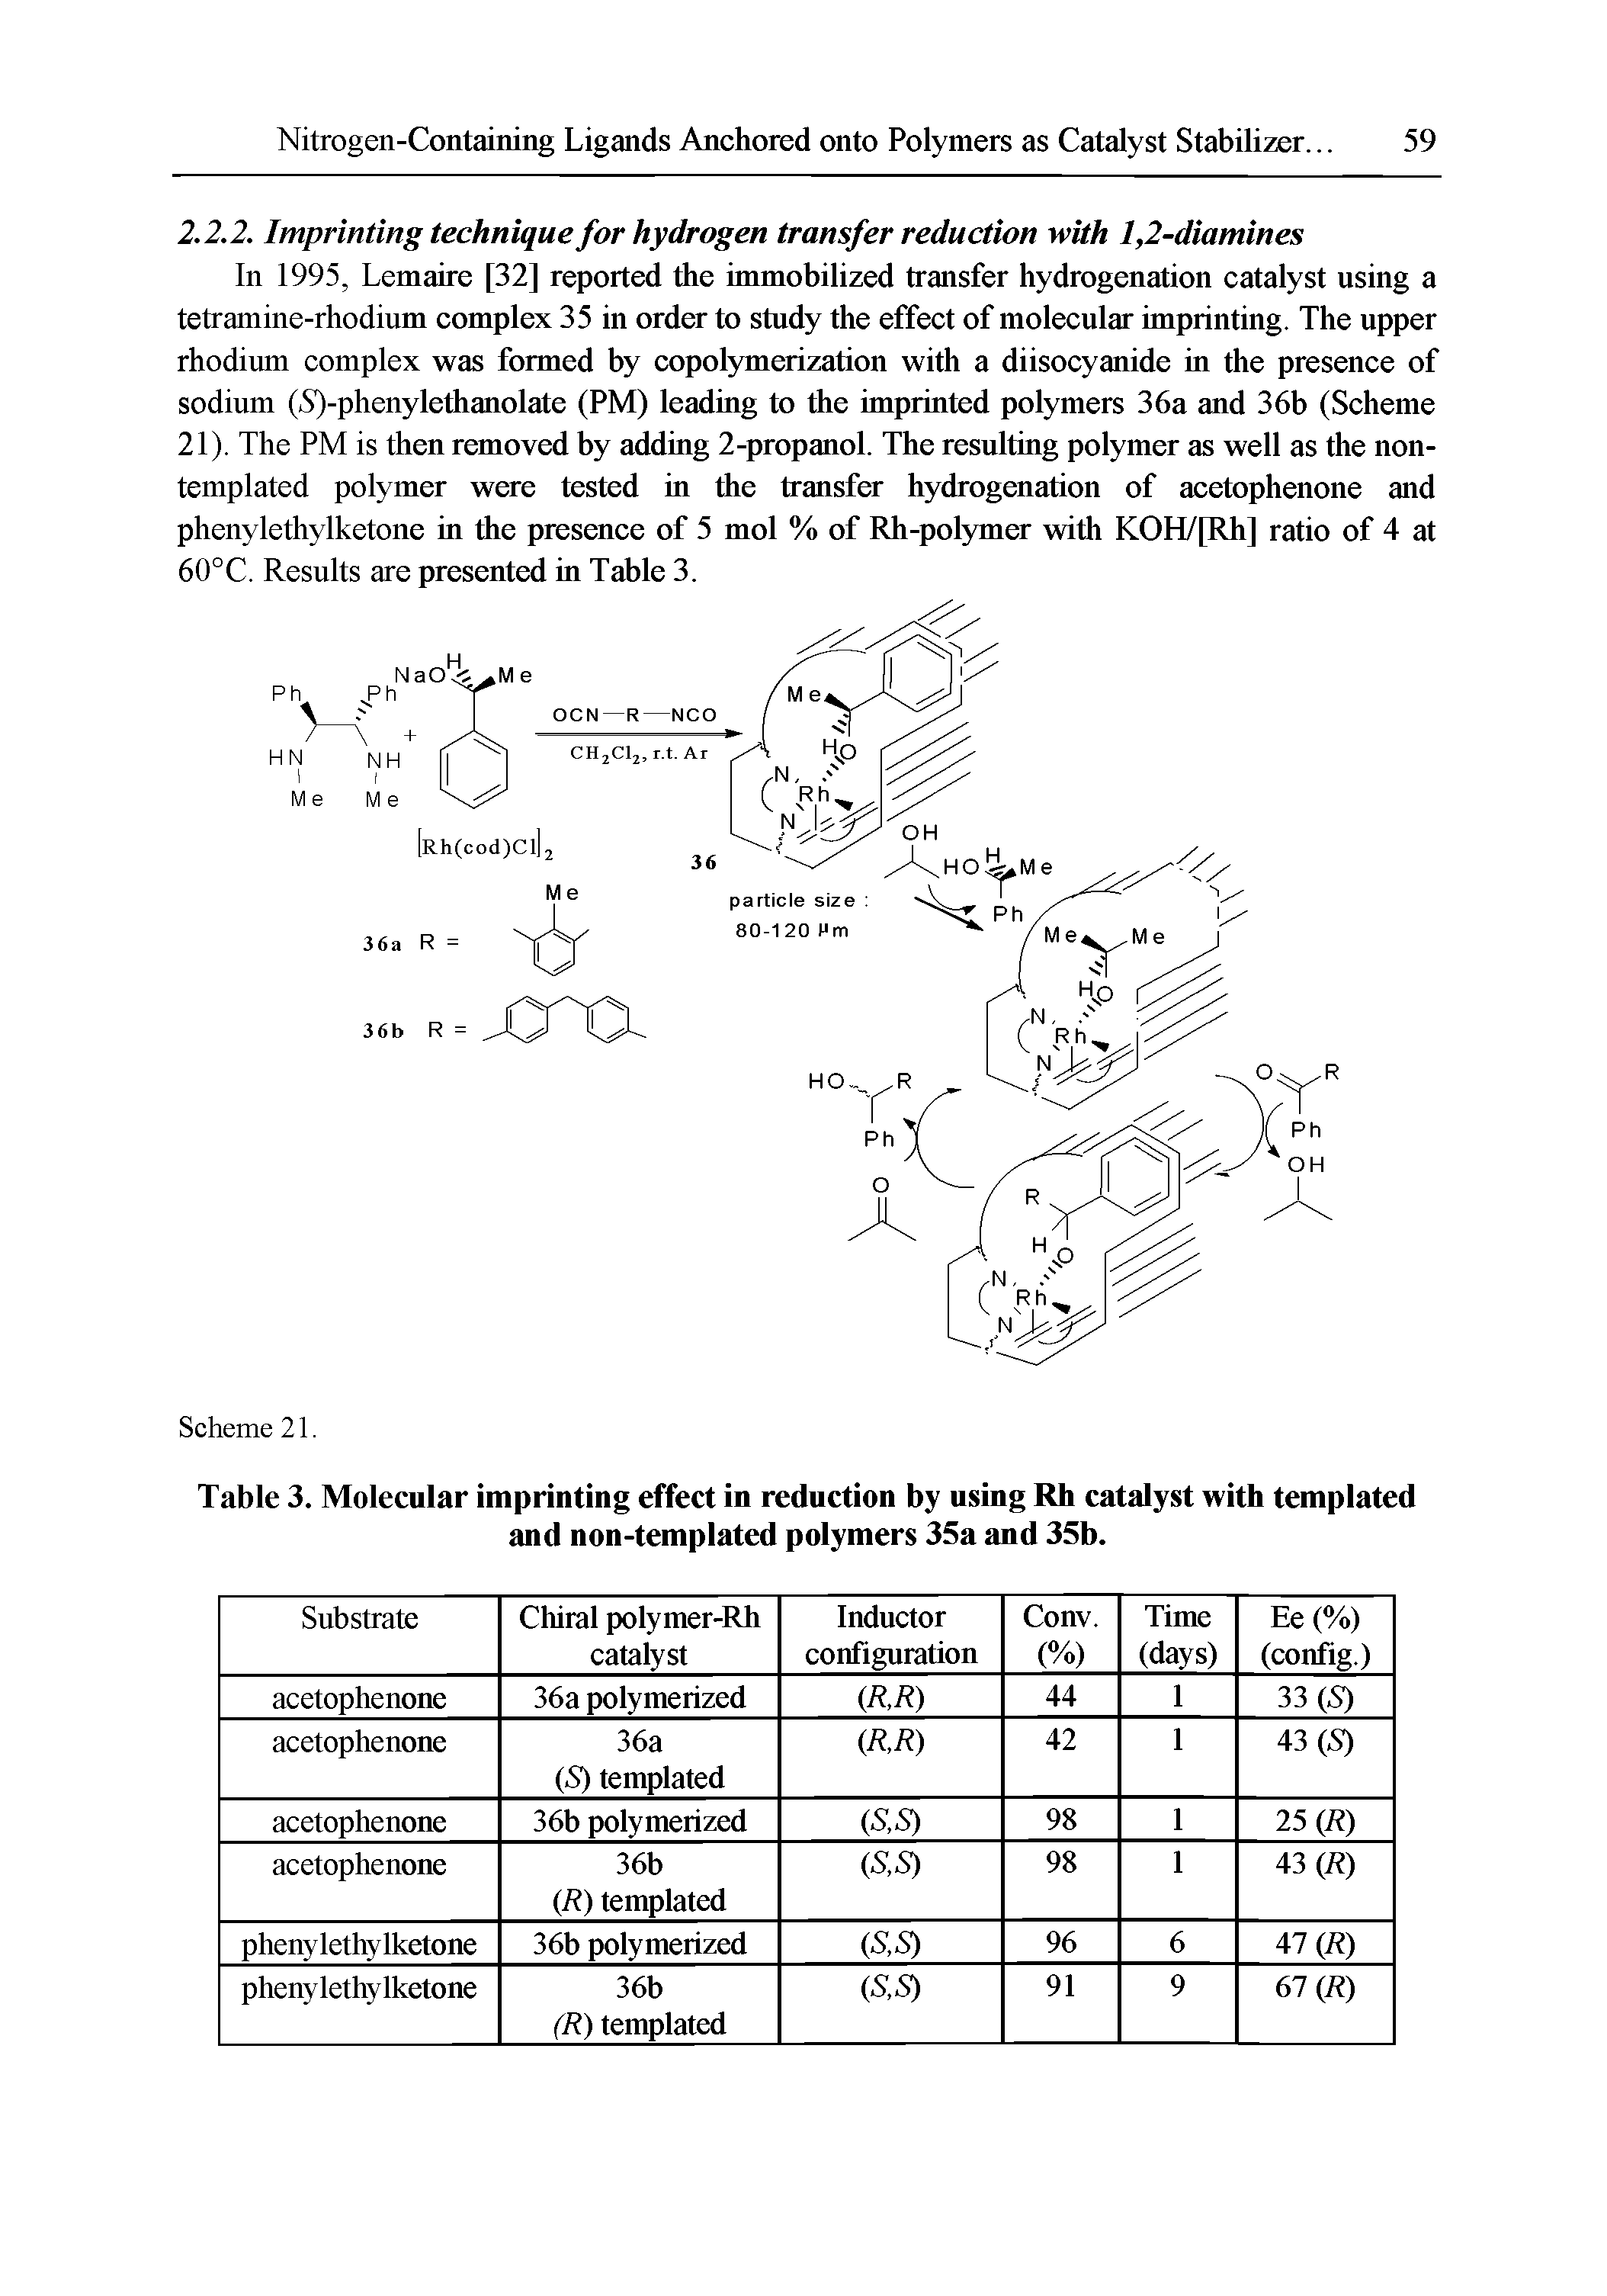 Table 3. Molecular imprinting effect in reduction by using Rh catalyst with templated and non-templated polymers 35a and 35b.